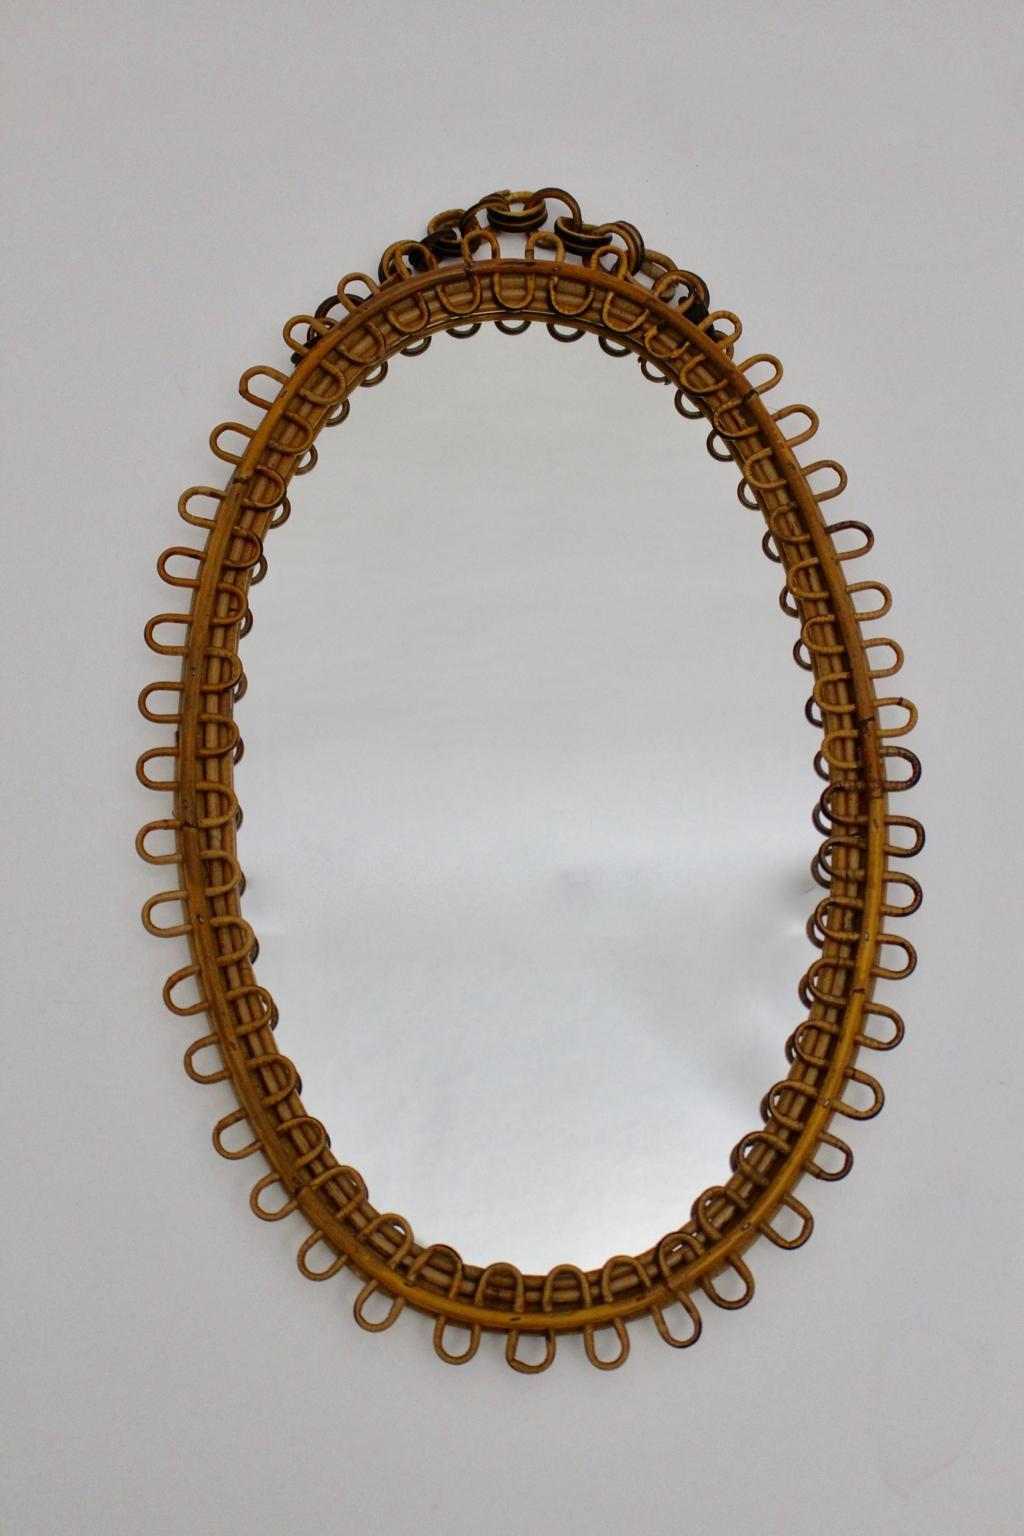 We present a very decorative Riviera style sunburst rattan wall mirror with curved beams.
The sunburst mirror is easy to hang up with a rattan chain.
Very good original vintage condition with minor signs of age and use.

approx. measures:
Width 44